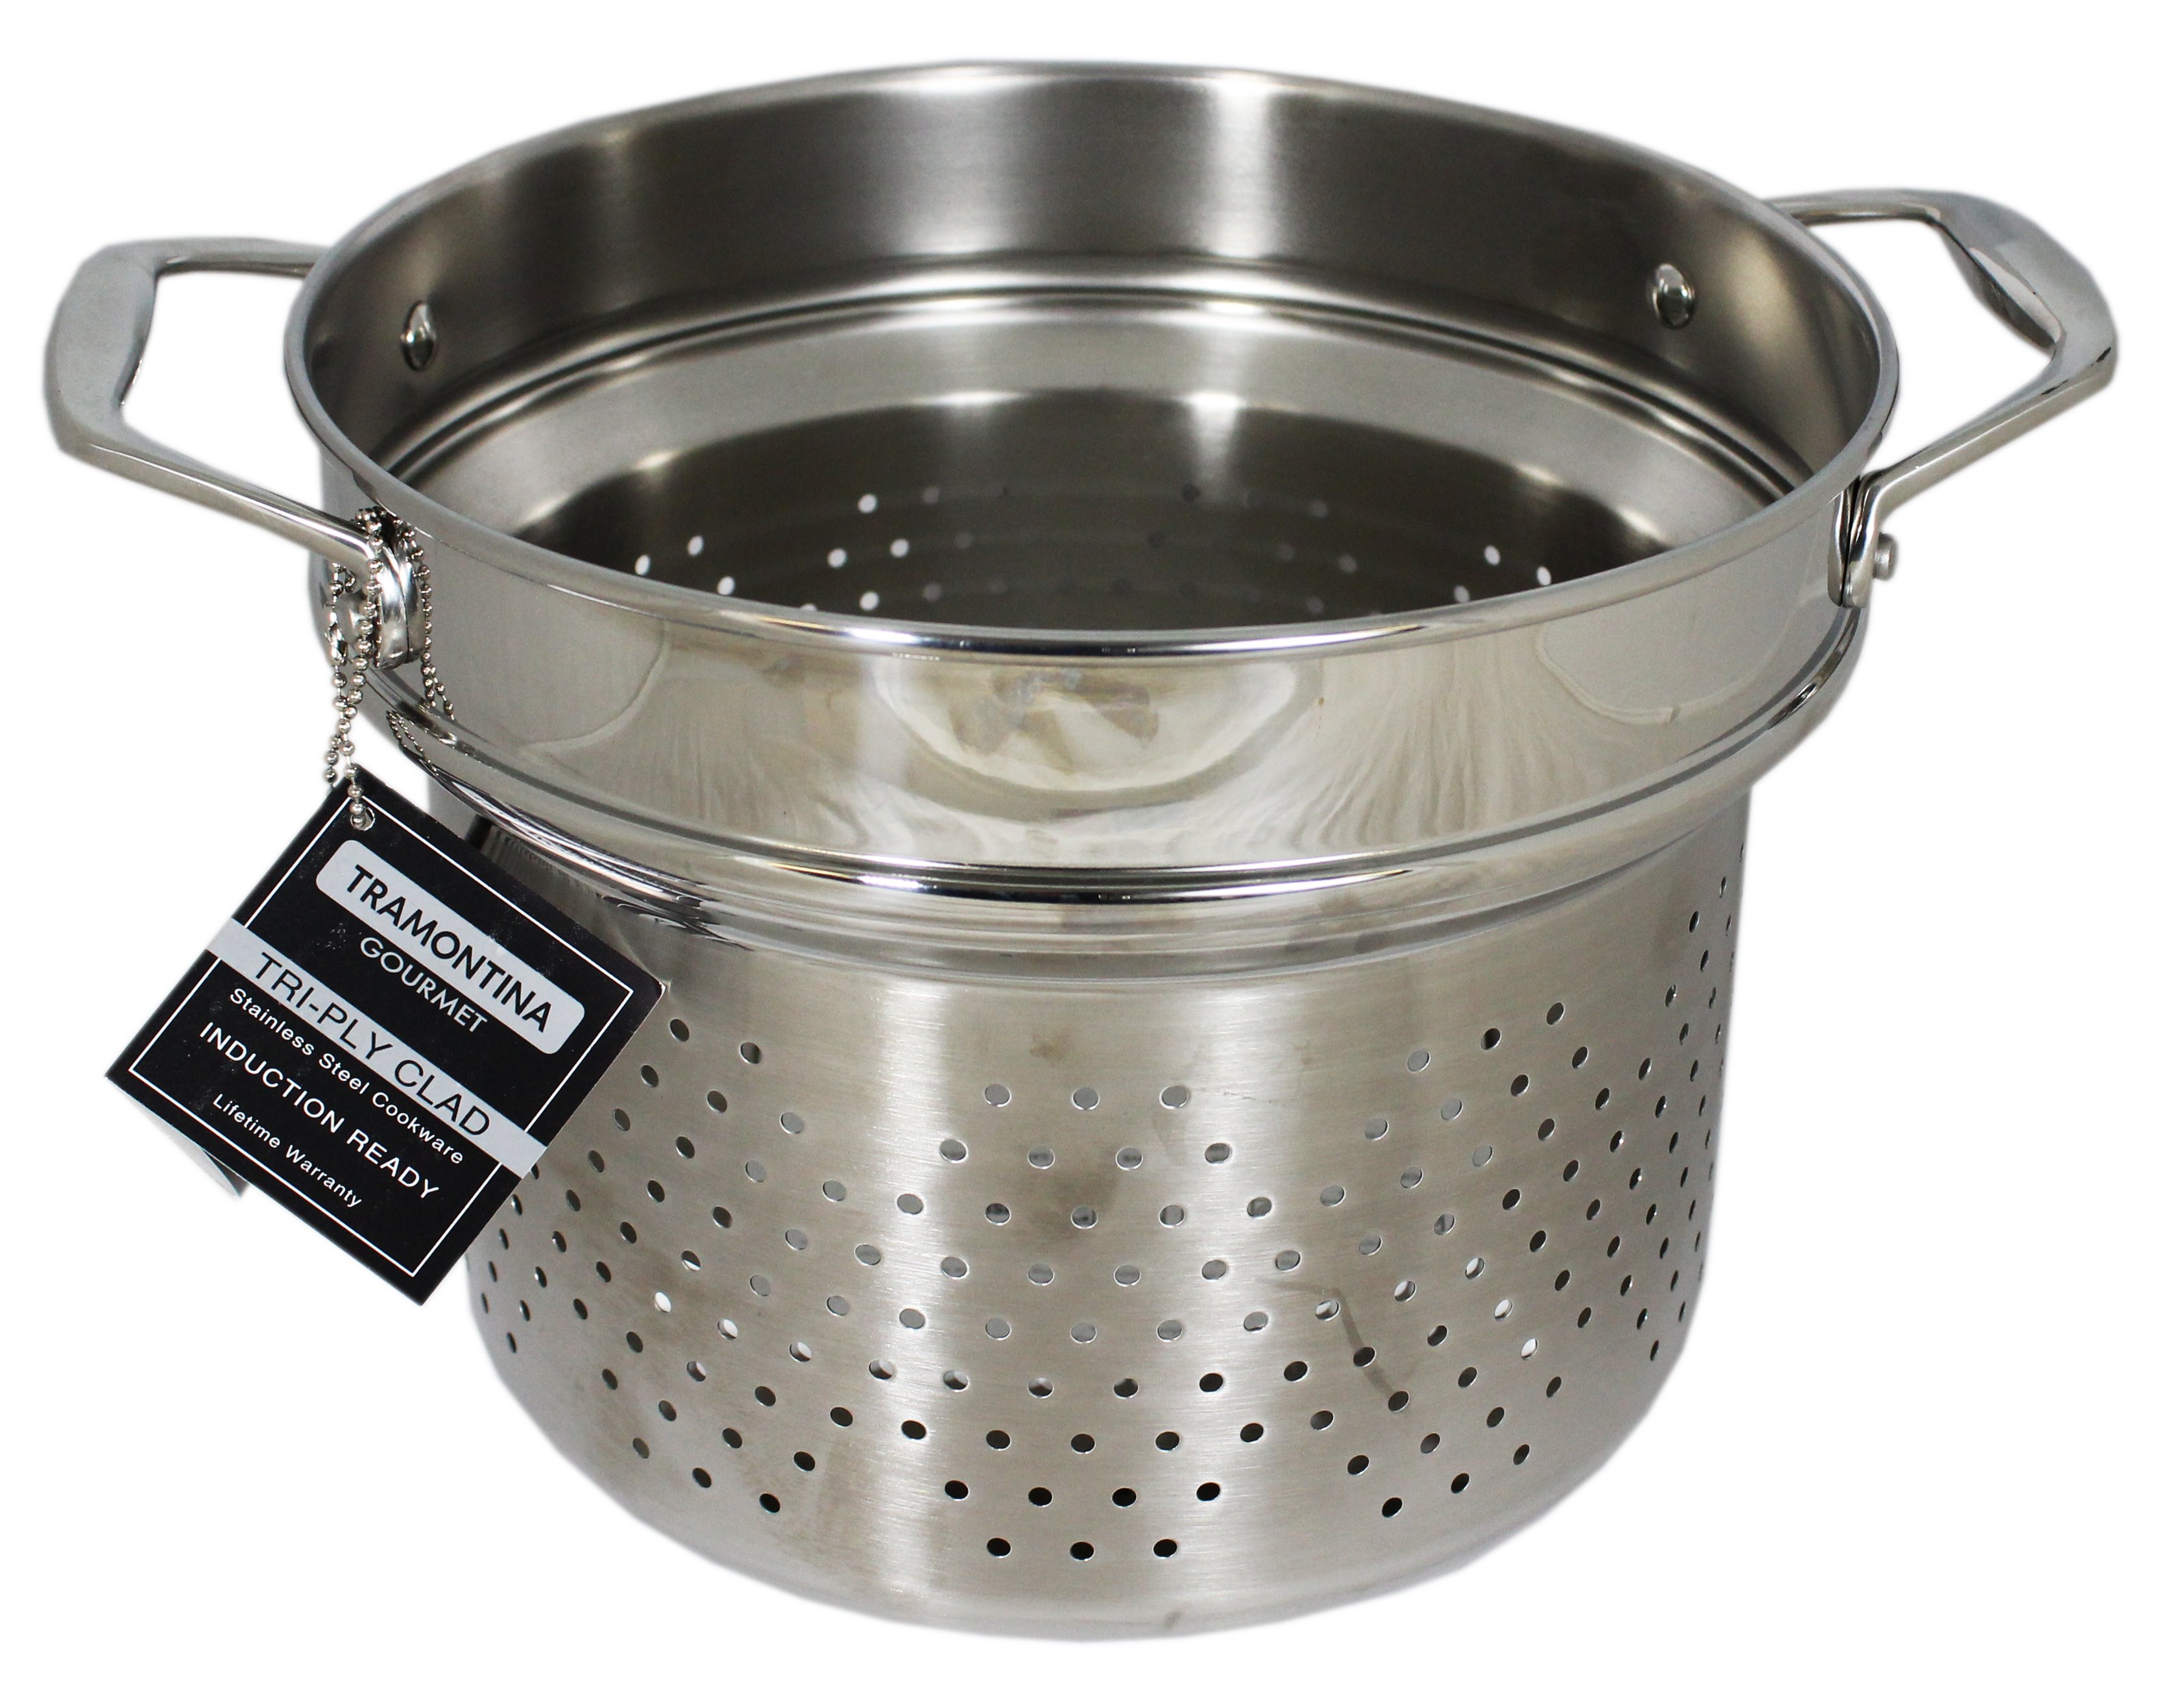 Tramontina Gourmet 24-Qt. Tri-Ply Covered Stock Pot Gray